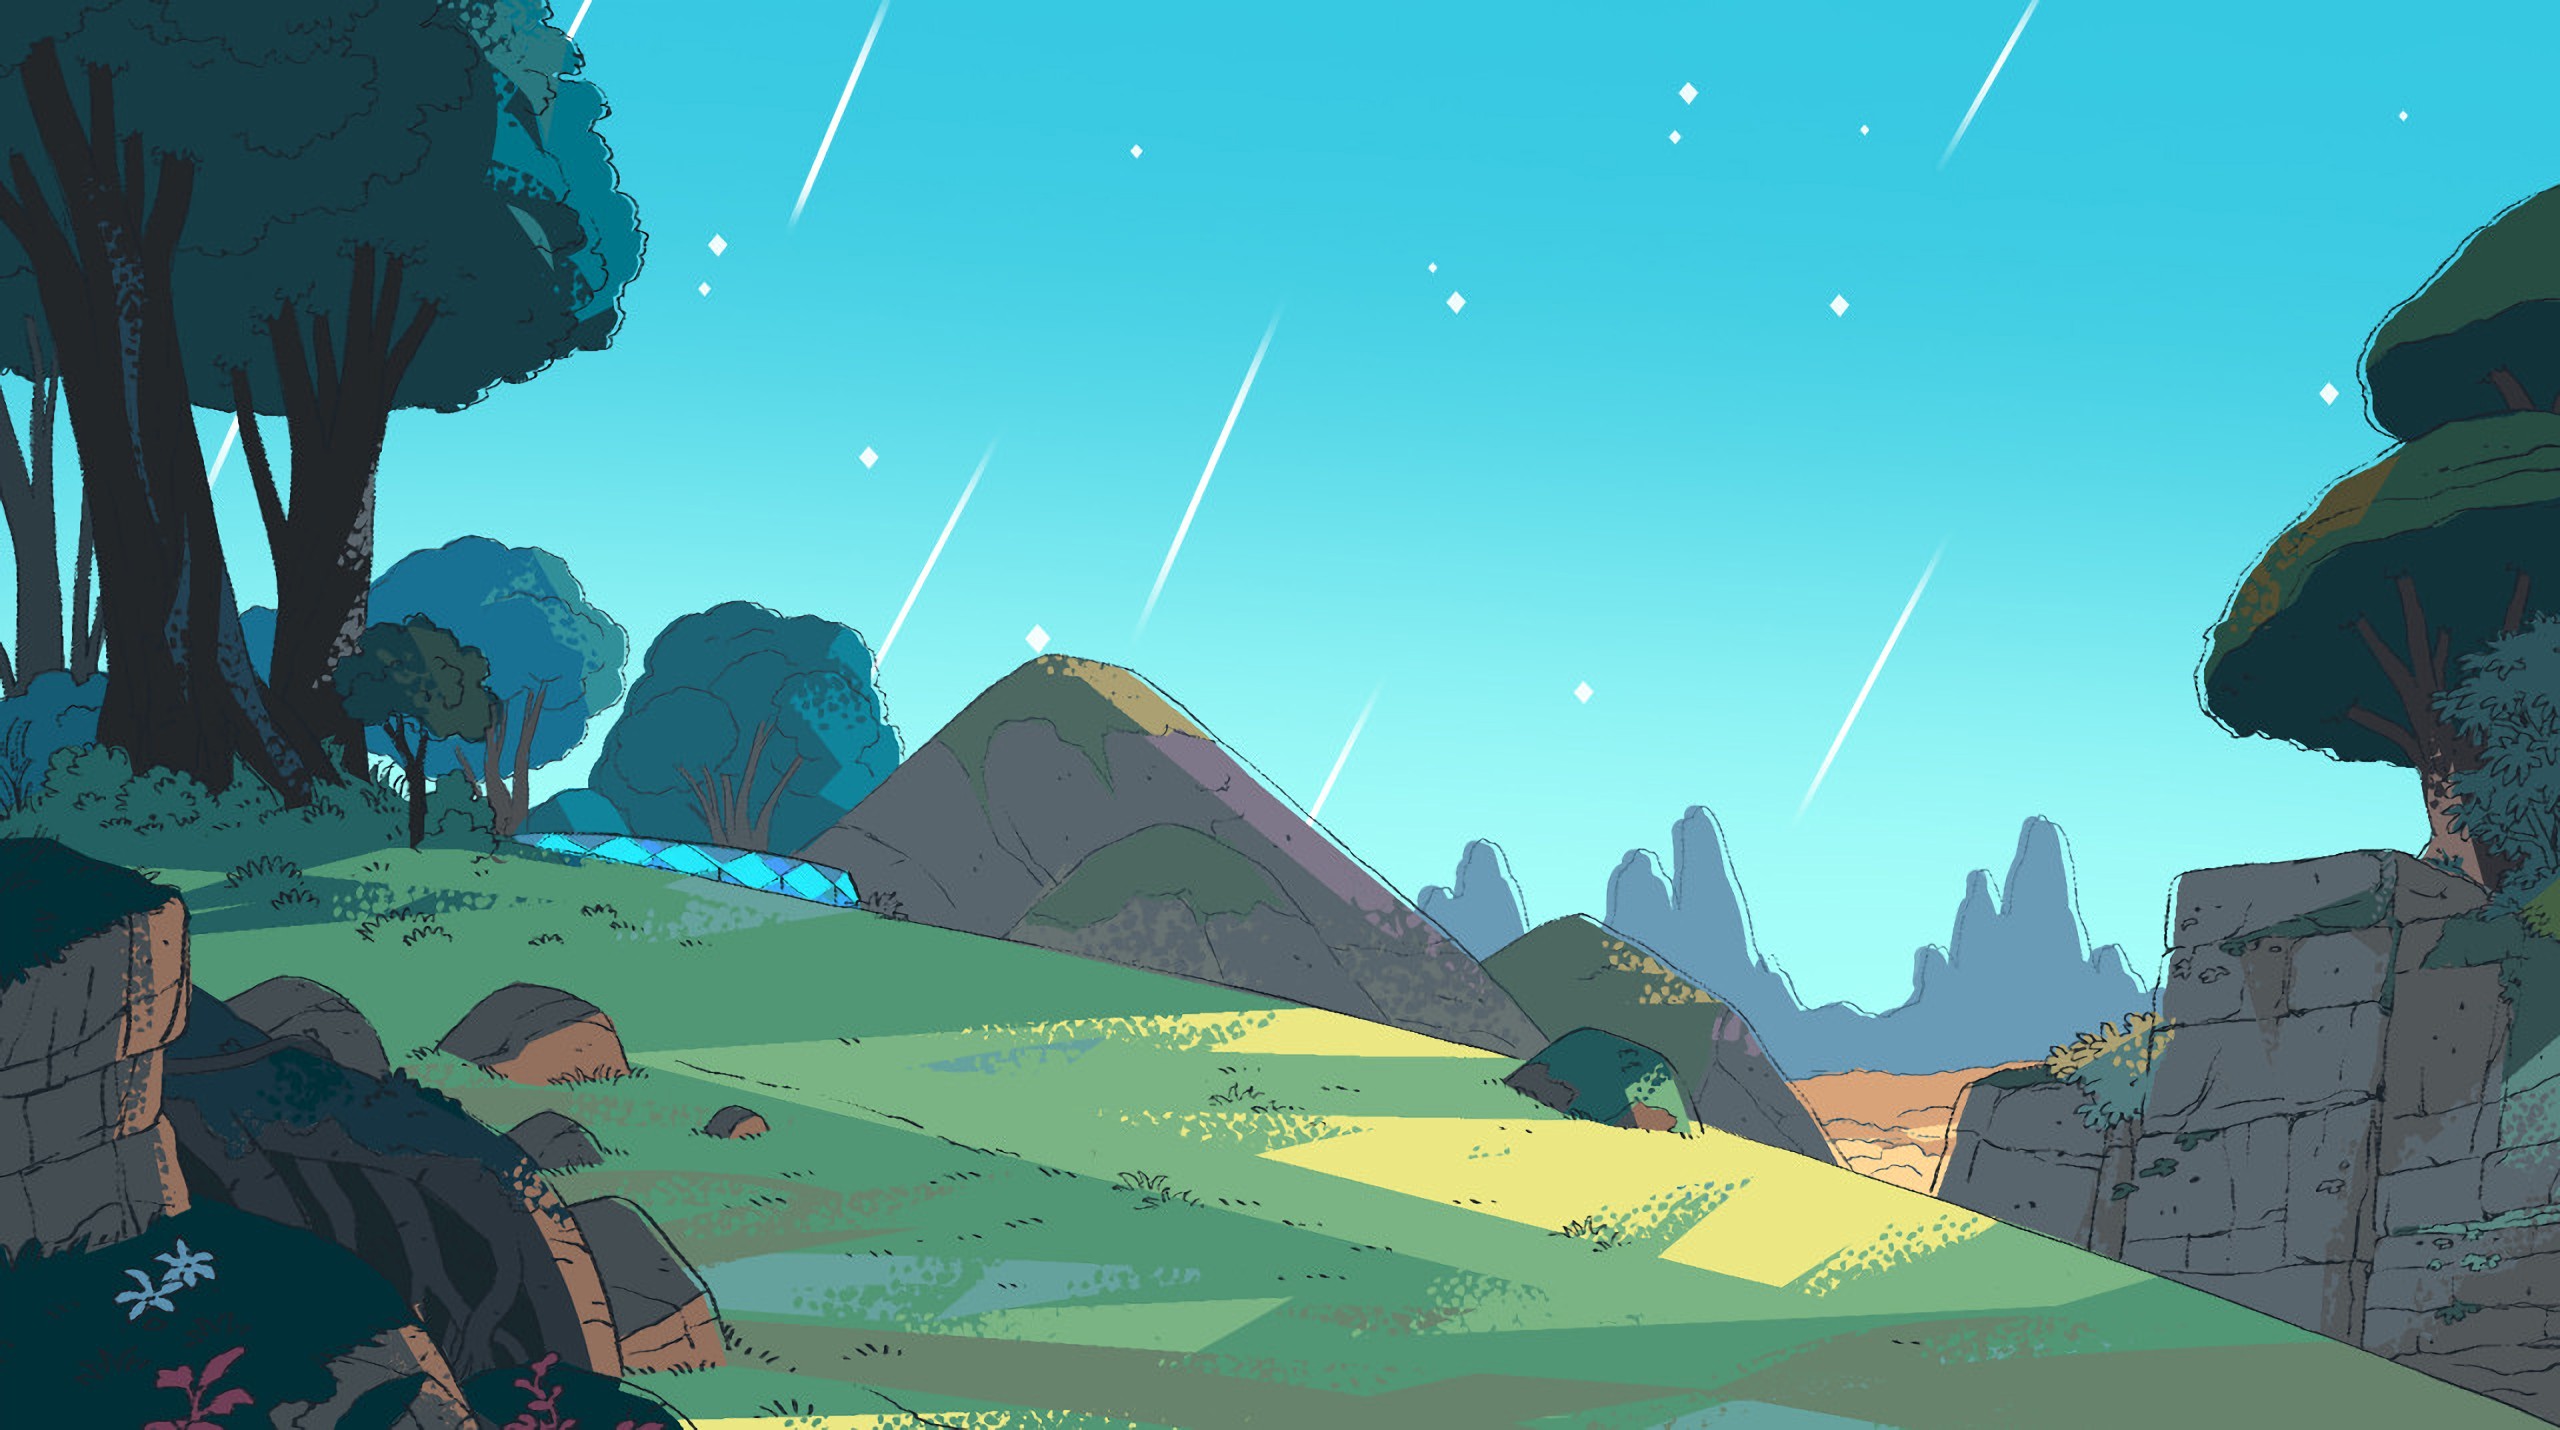 Steven Universe background Art ·① Download free awesome full HD